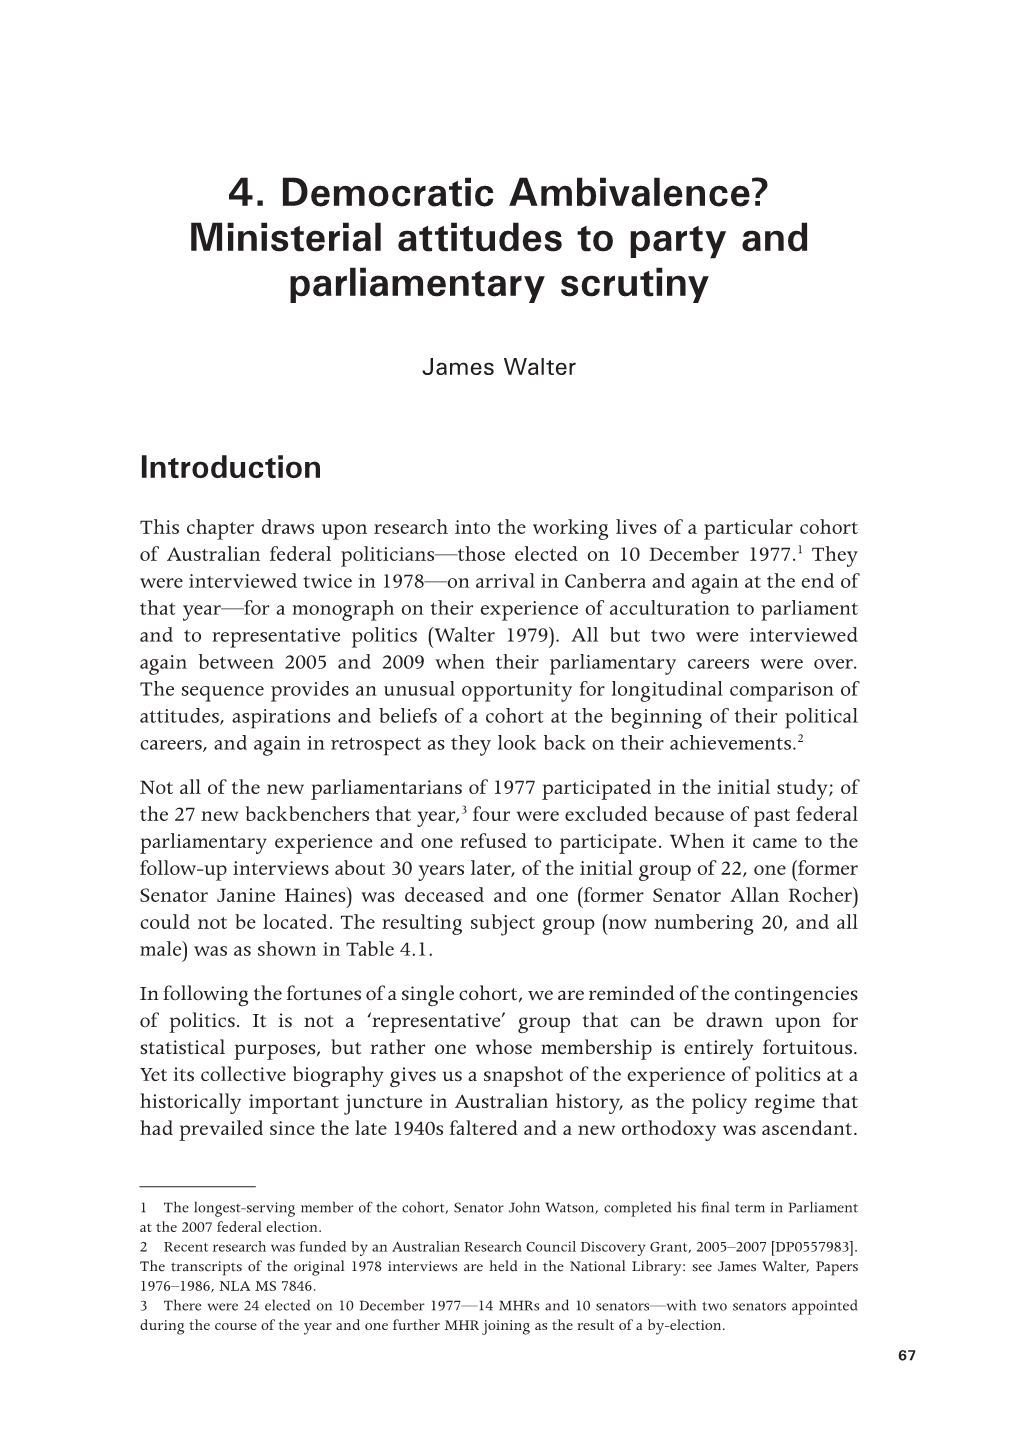 Democratic Ambivalence? Ministerial Attitudes to Party and Parliamentary Scrutiny